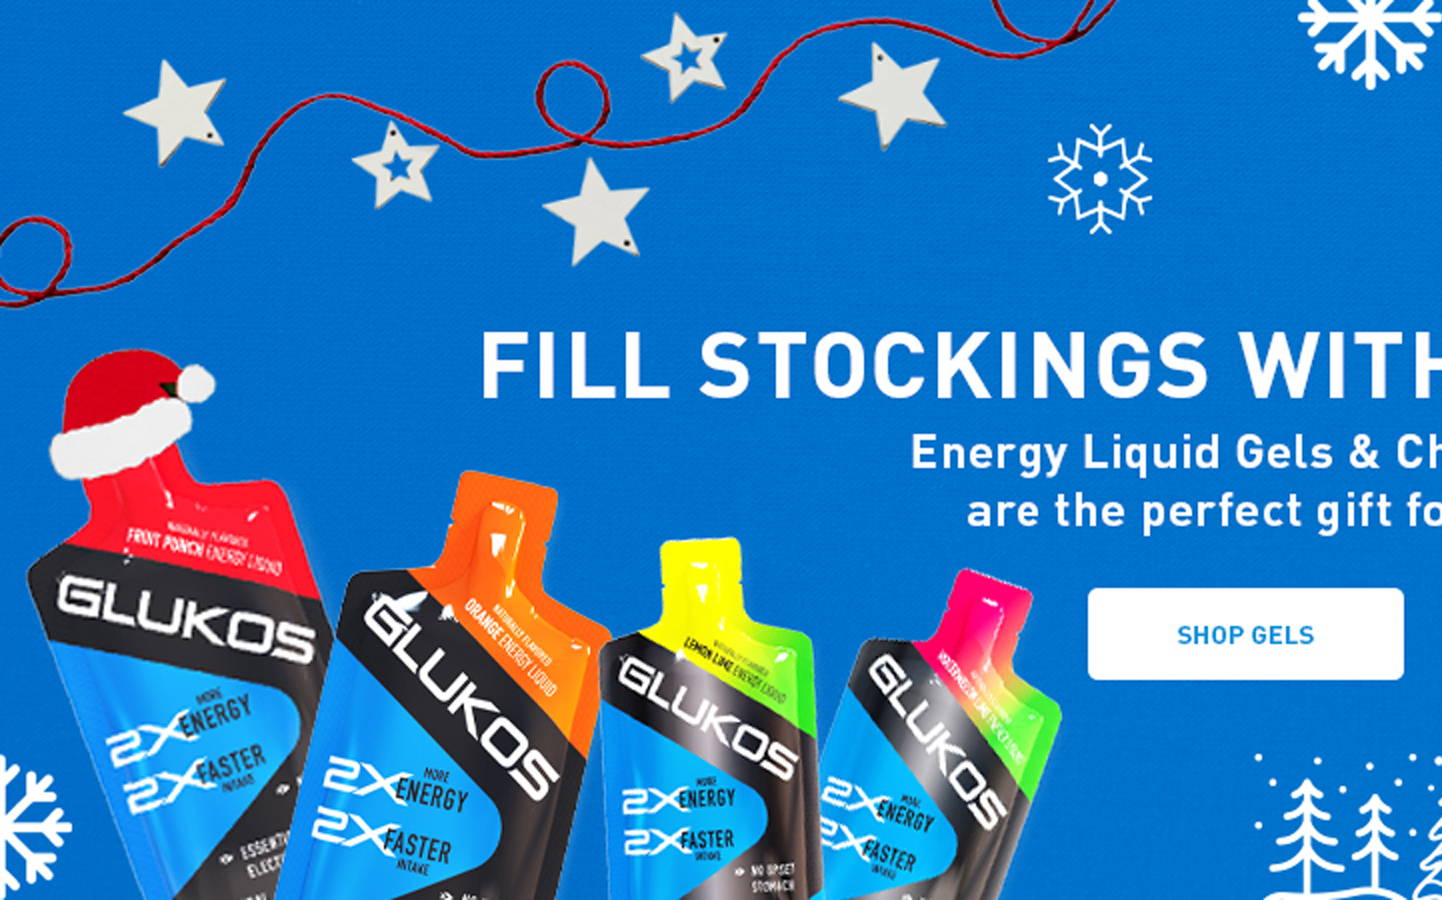 Fill Stockings with on-the-go energy. Energy Liquid Gels & Chewable Energy Tablets are the perfect gift for anyone on your list! Shop Gels